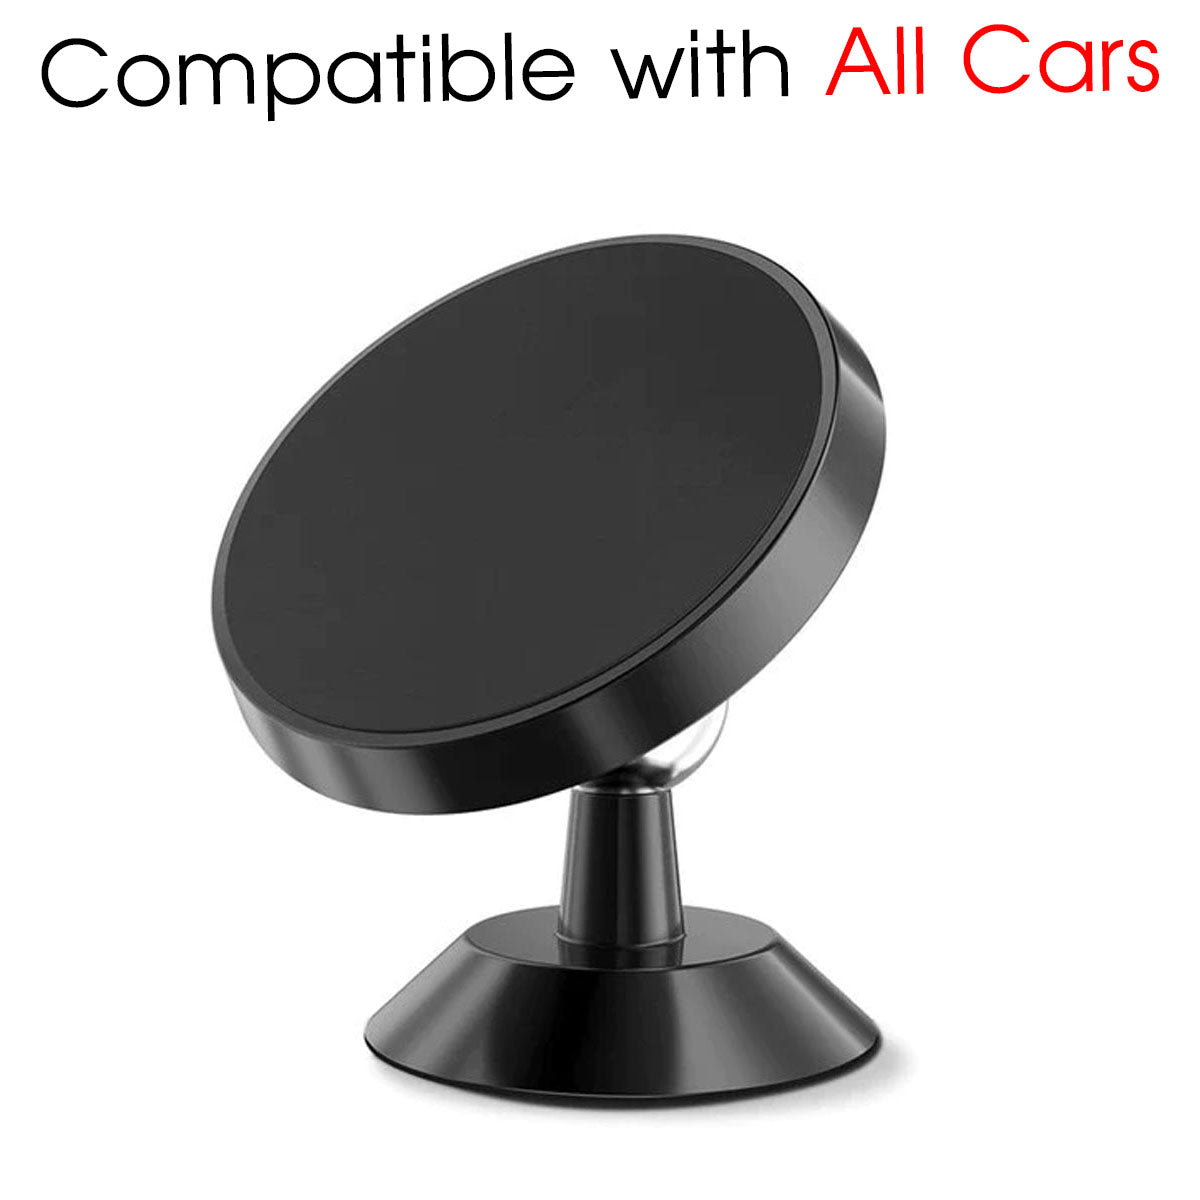 [2 Pack ] Magnetic Phone Mount, Custom For Your Cars, [ Super Strong Magnet ] [ with 4 Metal Plate ] car Magnetic Phone Holder, [ 360° Rotation ] Universal Dashboard car Mount Fits All Cell Phones, Car Accessories TY13982